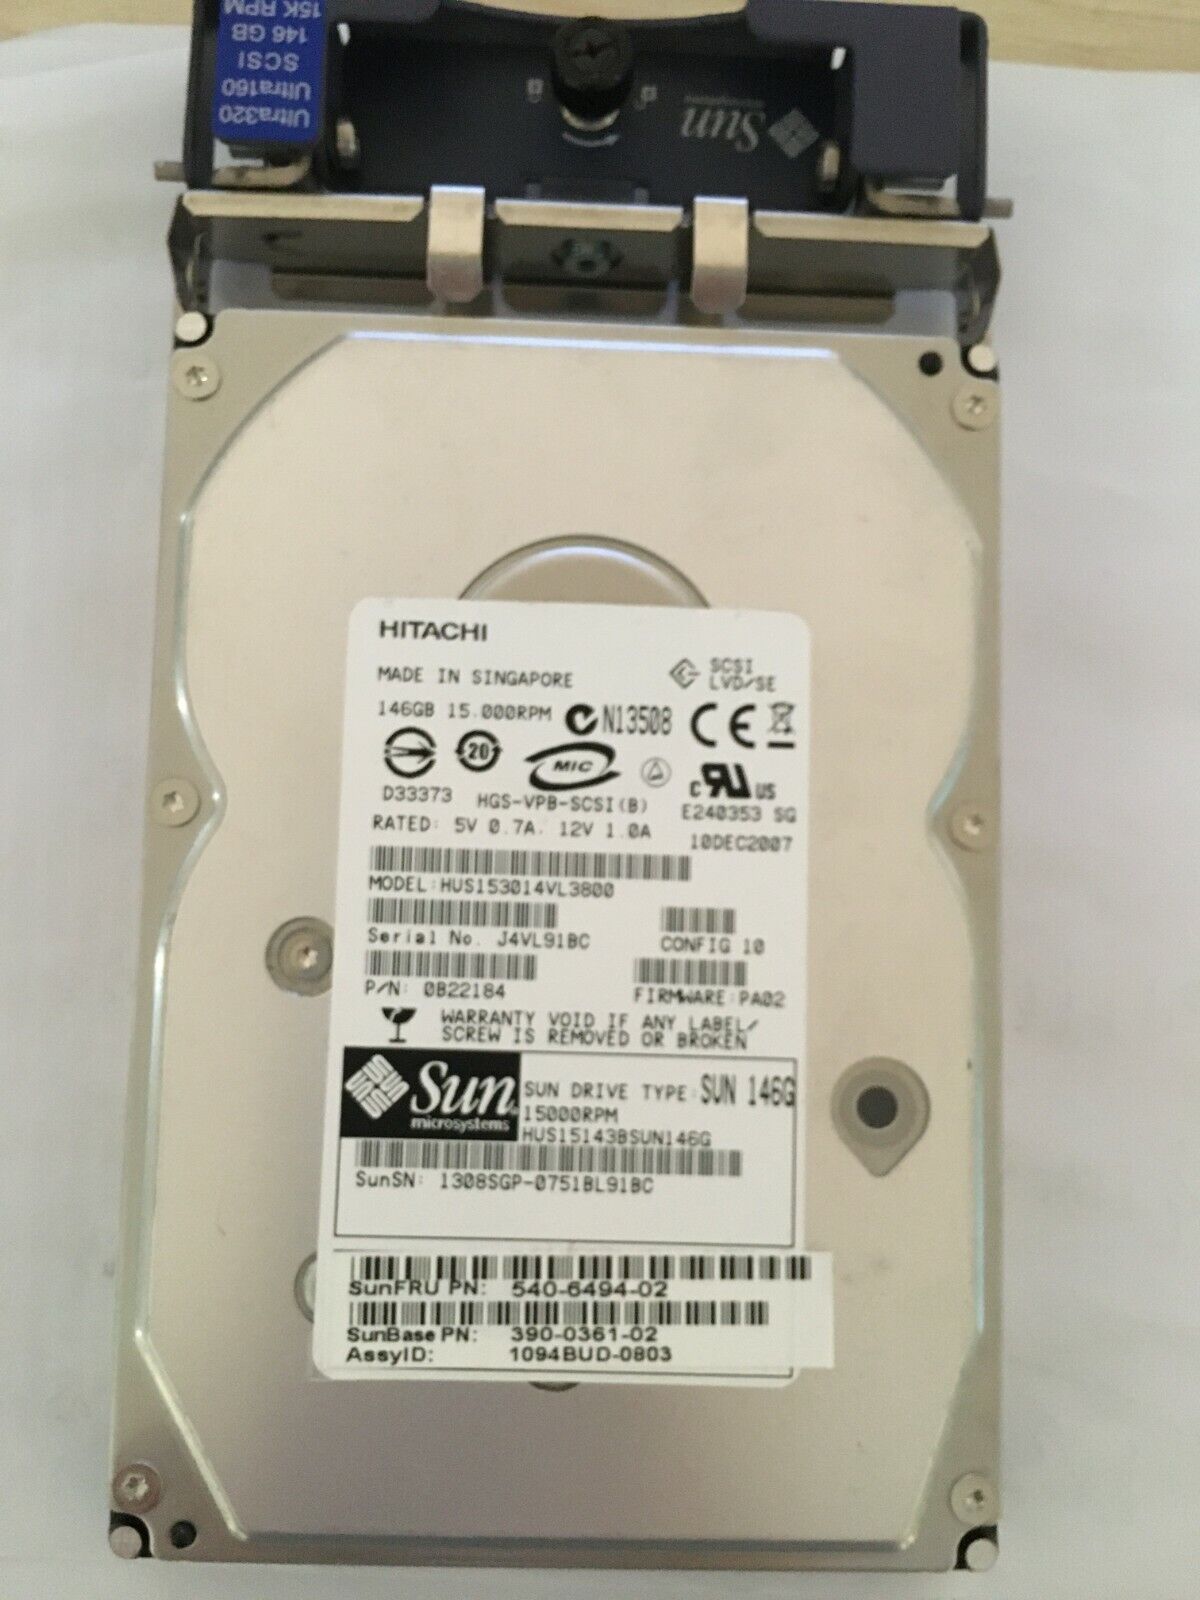 Sun 540-6494 （390-0361） 146.8GB - 15000 RPM, Disk Assembly 